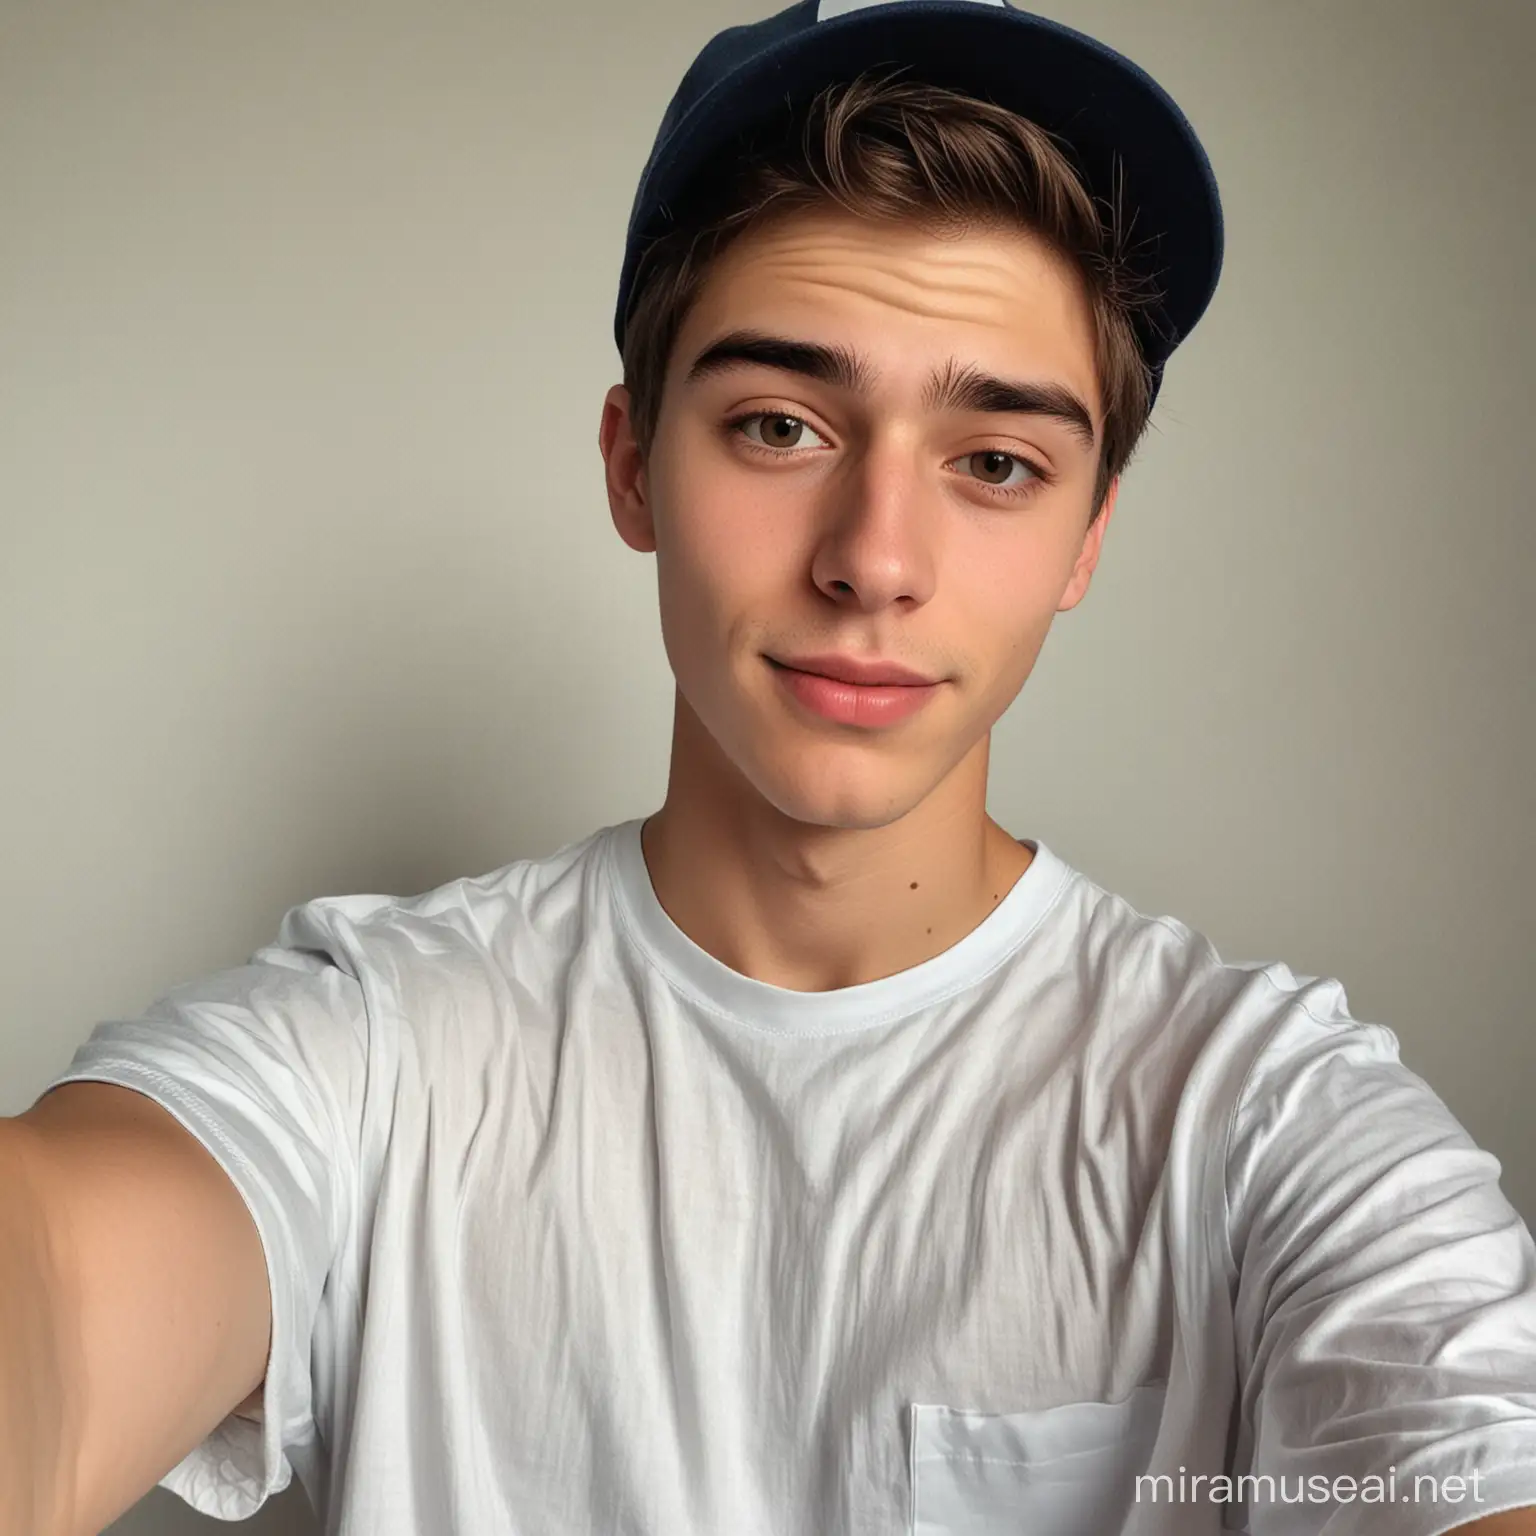 A attractive teen guy. He is wearing a cap, wearing an oversized shirt and taaking a selfie